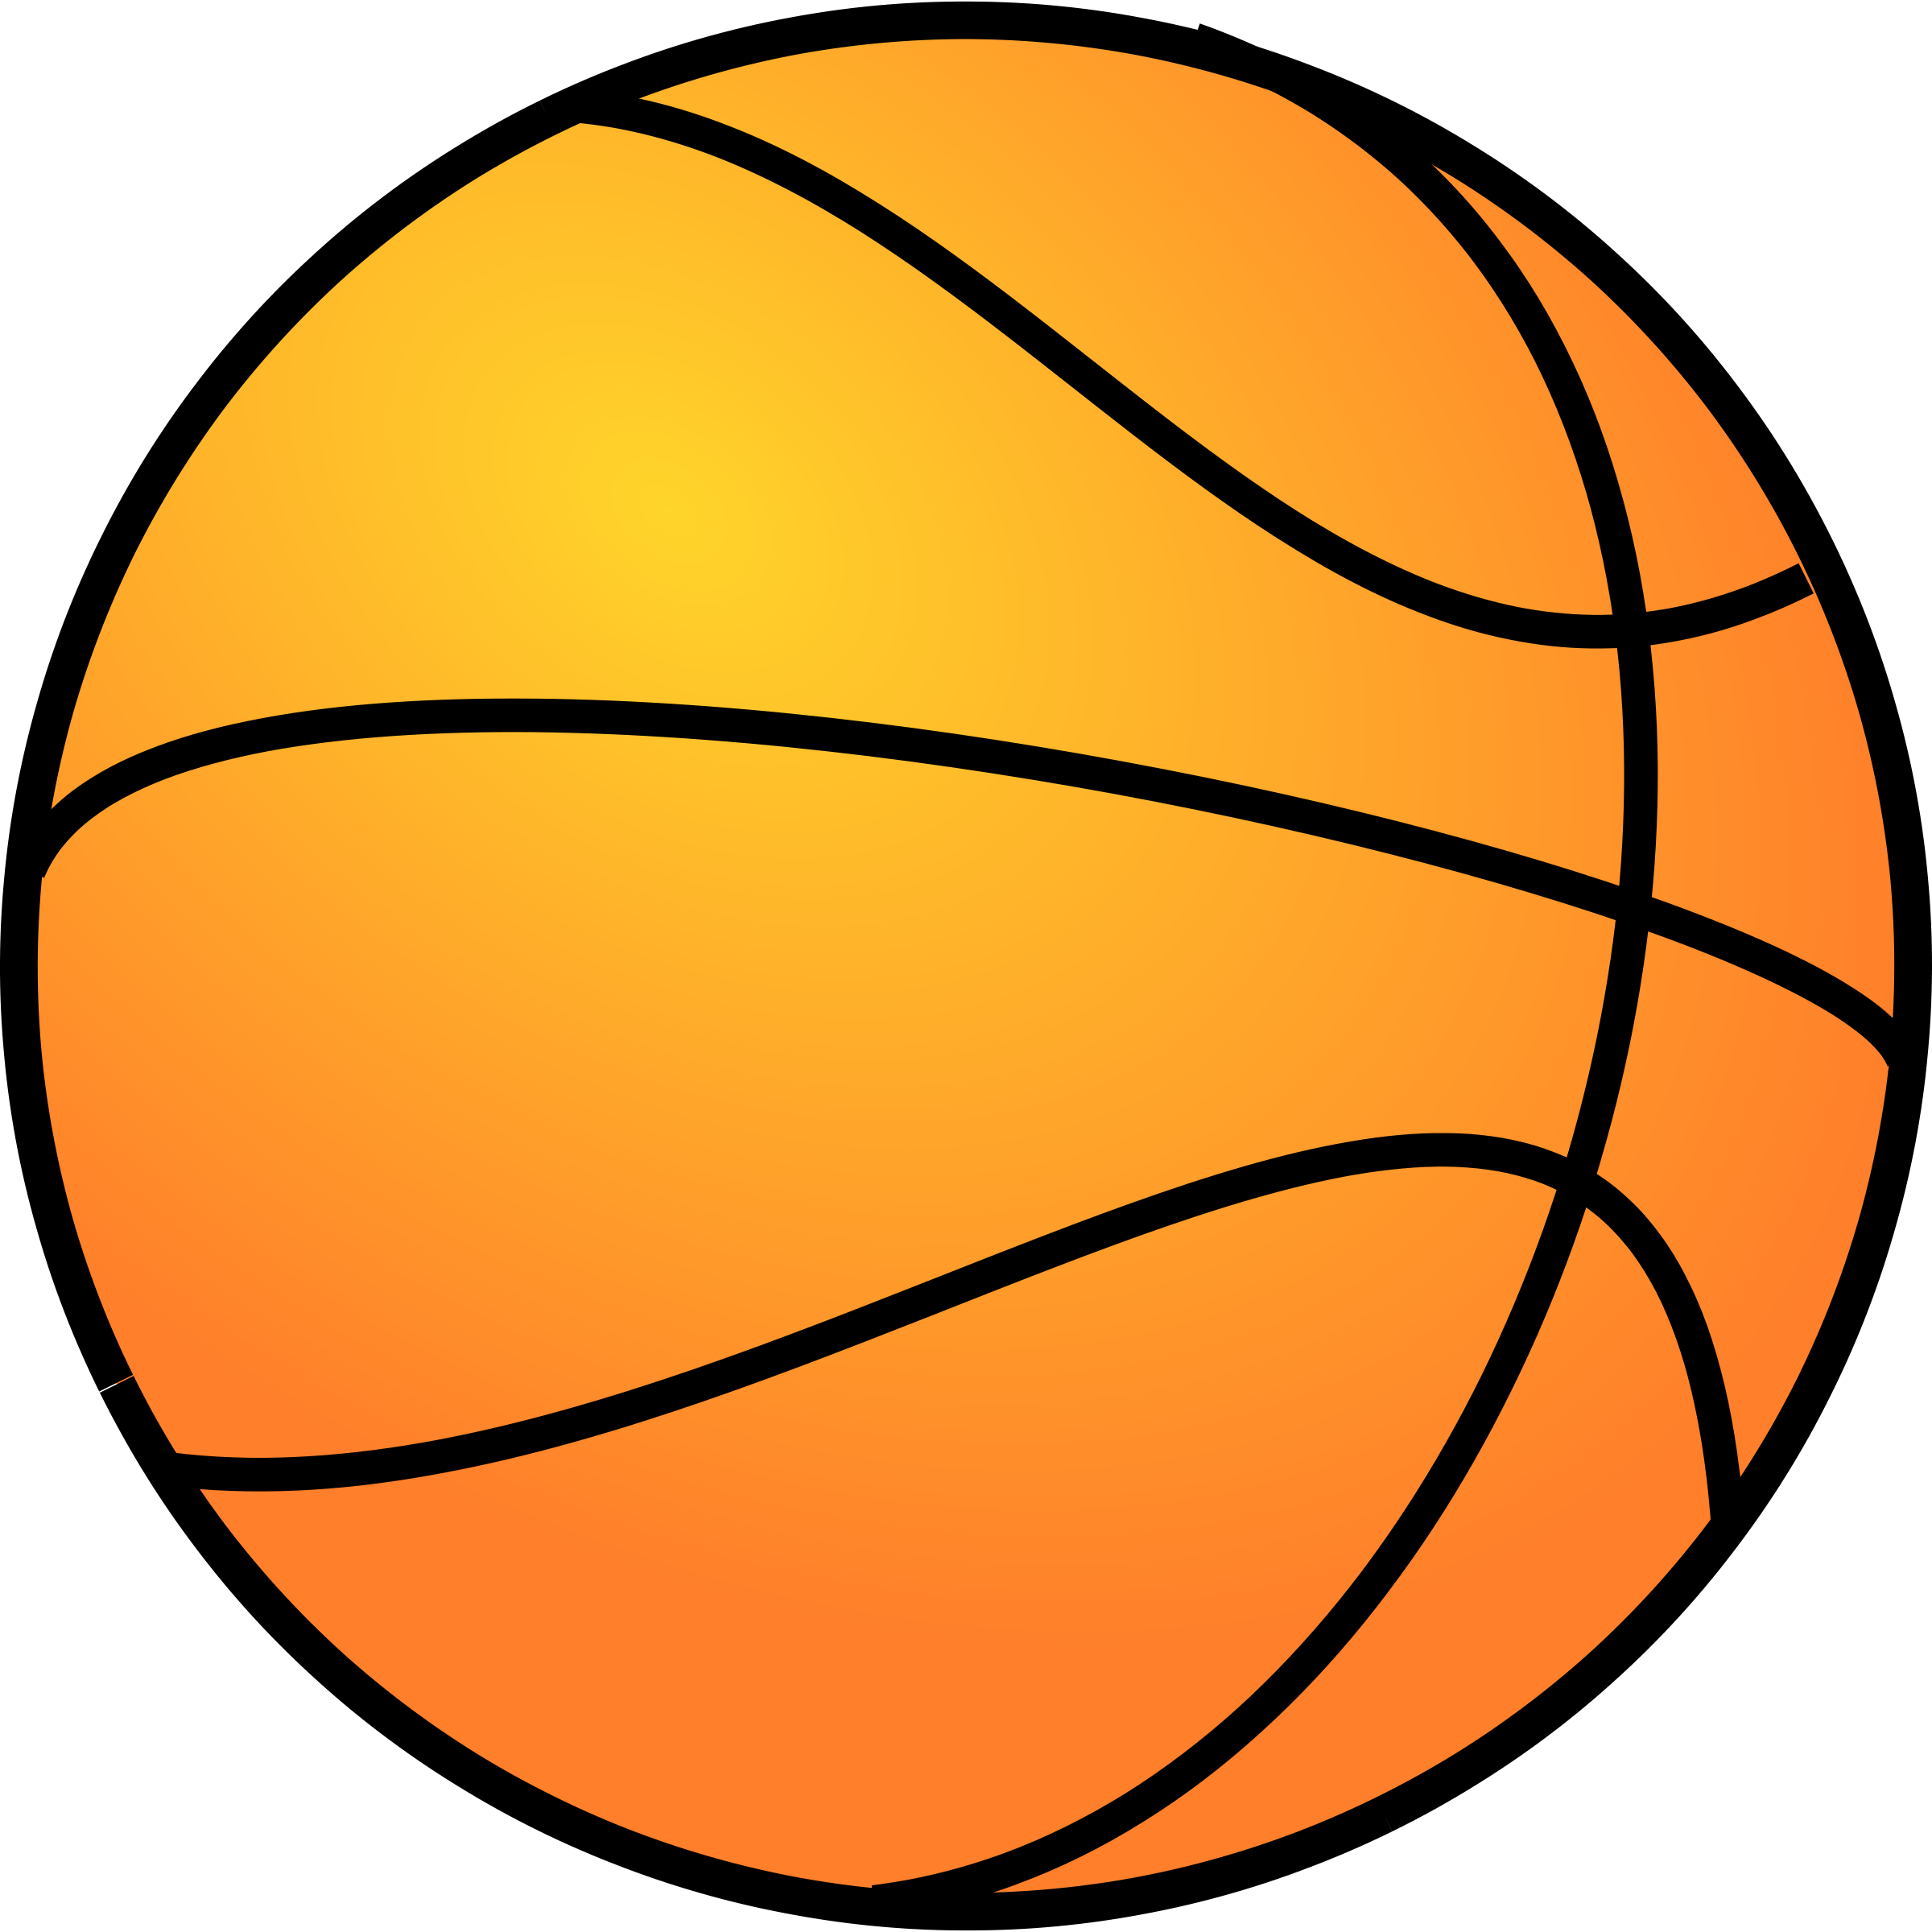 Flaming basketball clipart cl